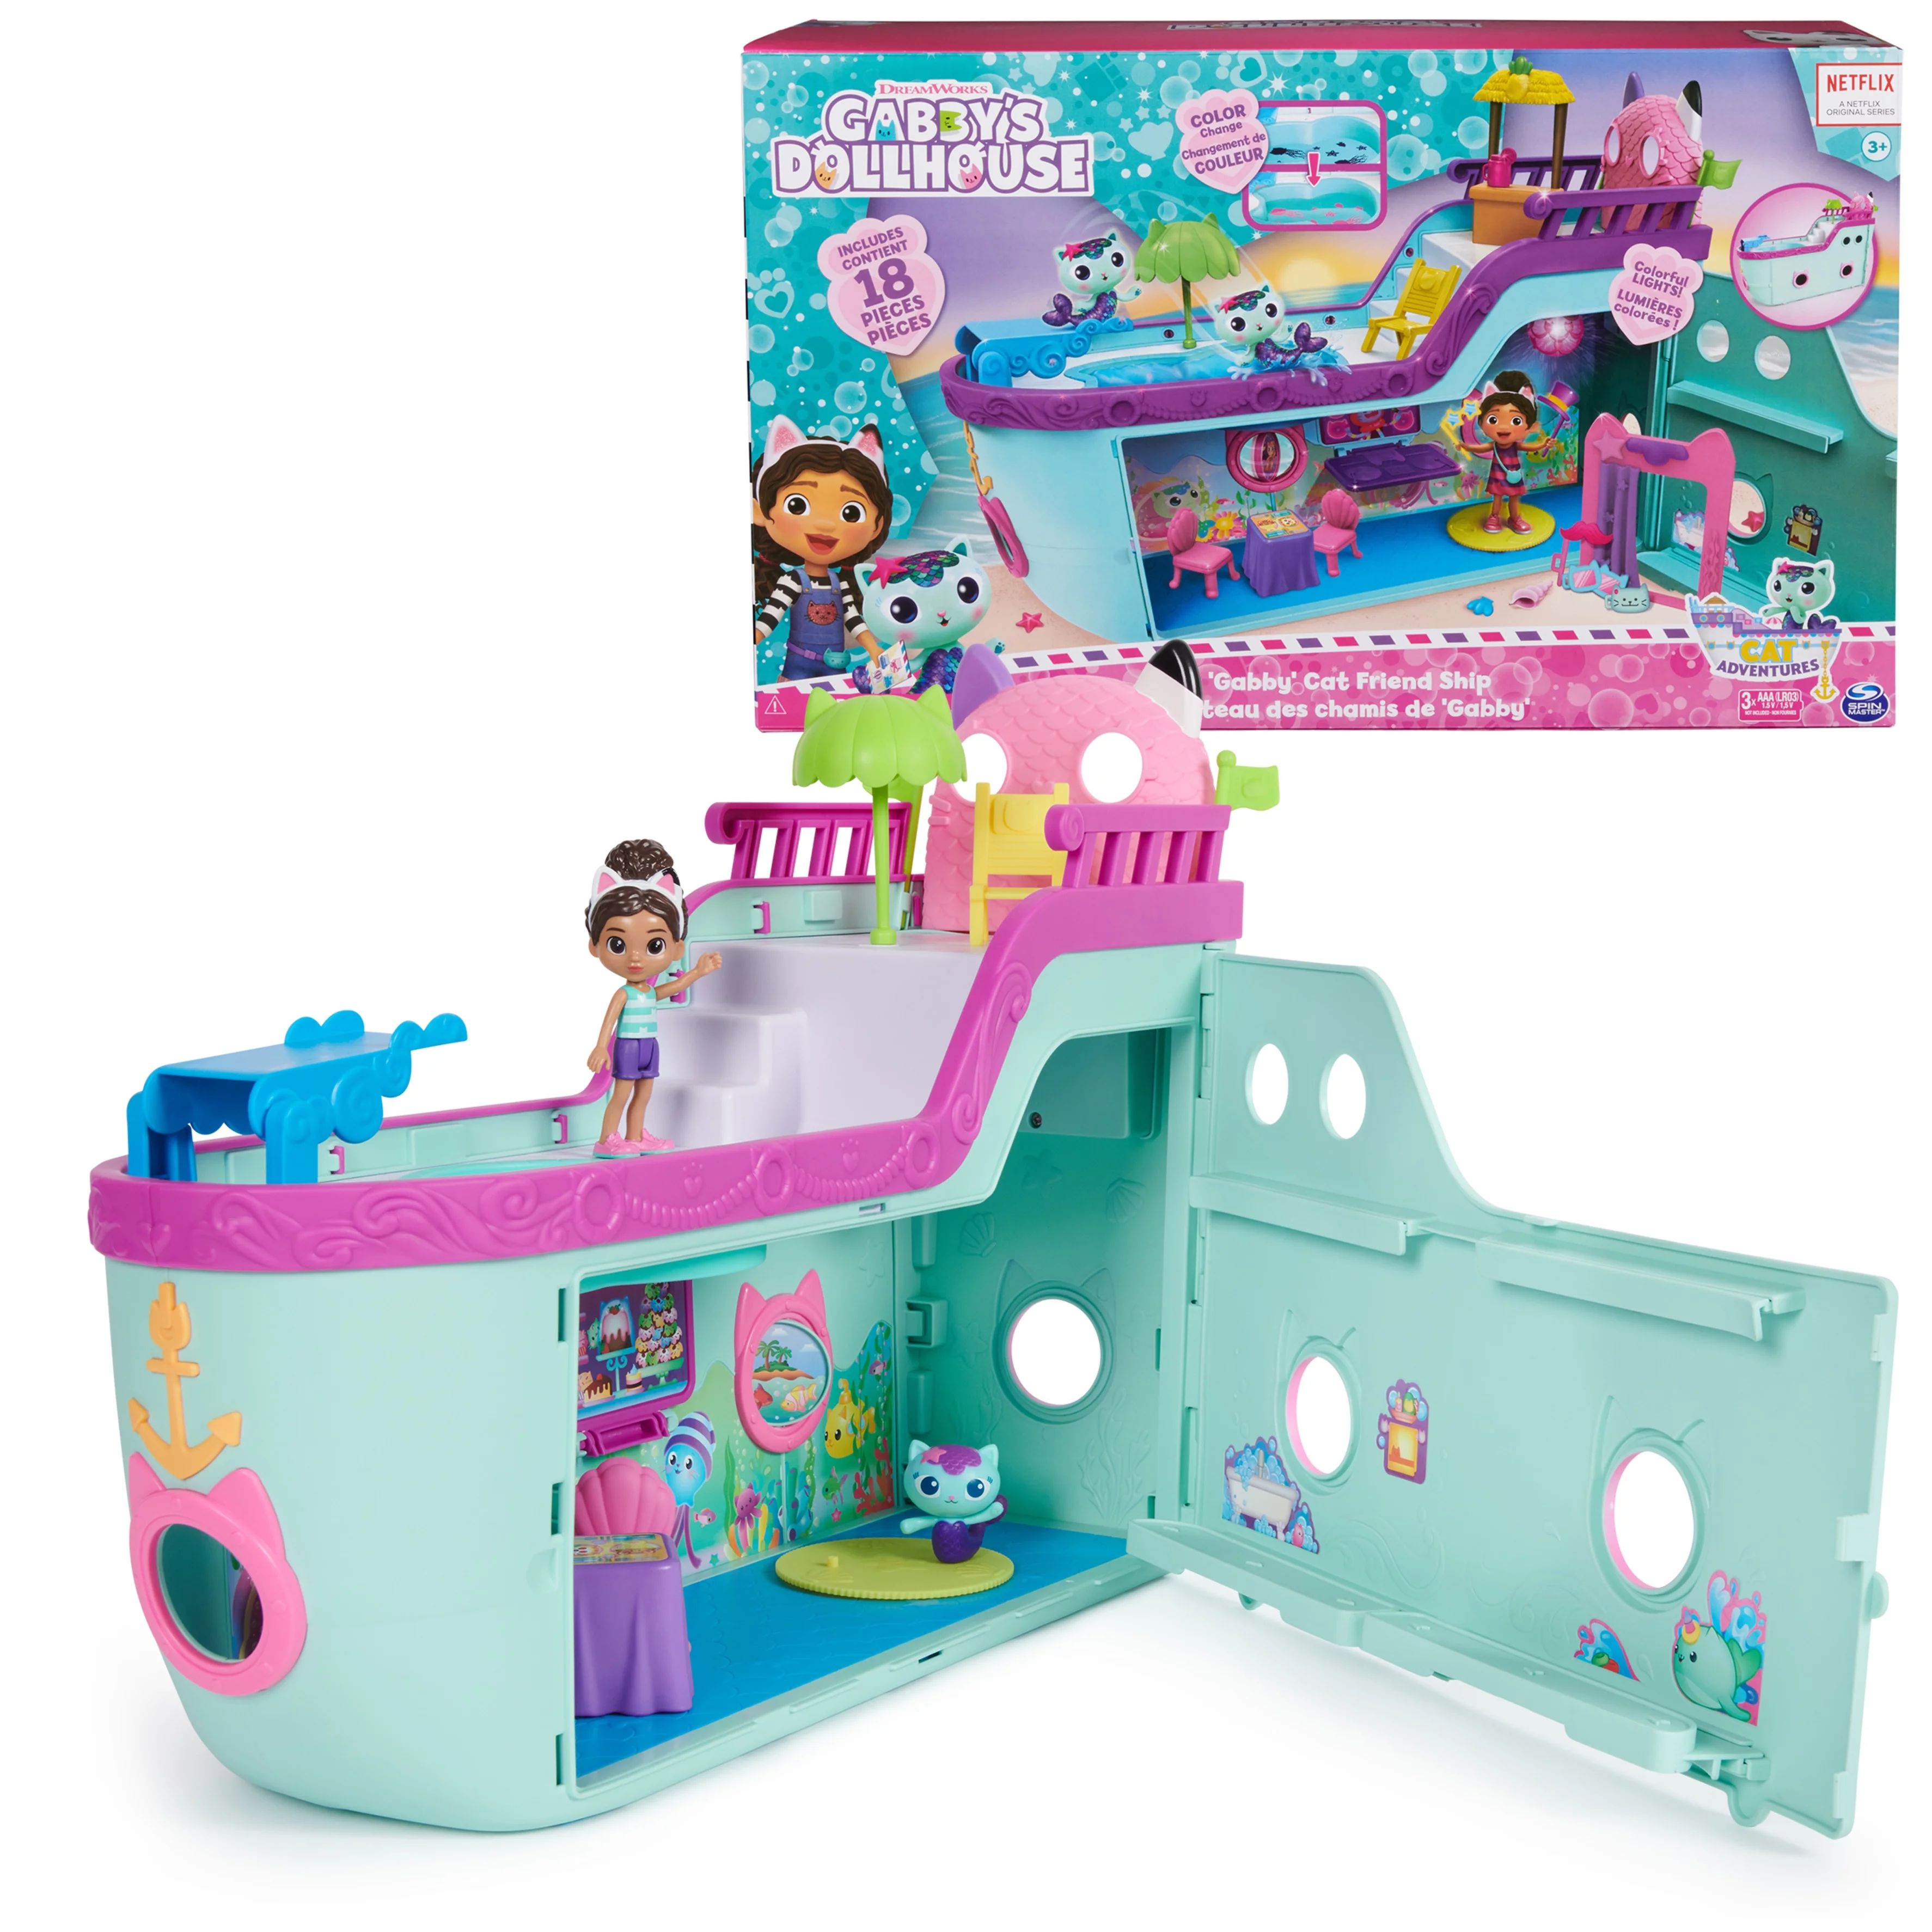 Gabby’s Dollhouse, Gabby Cat Friend Ship Cruise Ship Toy Vehicle Playset, for Kids age 3 and up | Walmart (US)